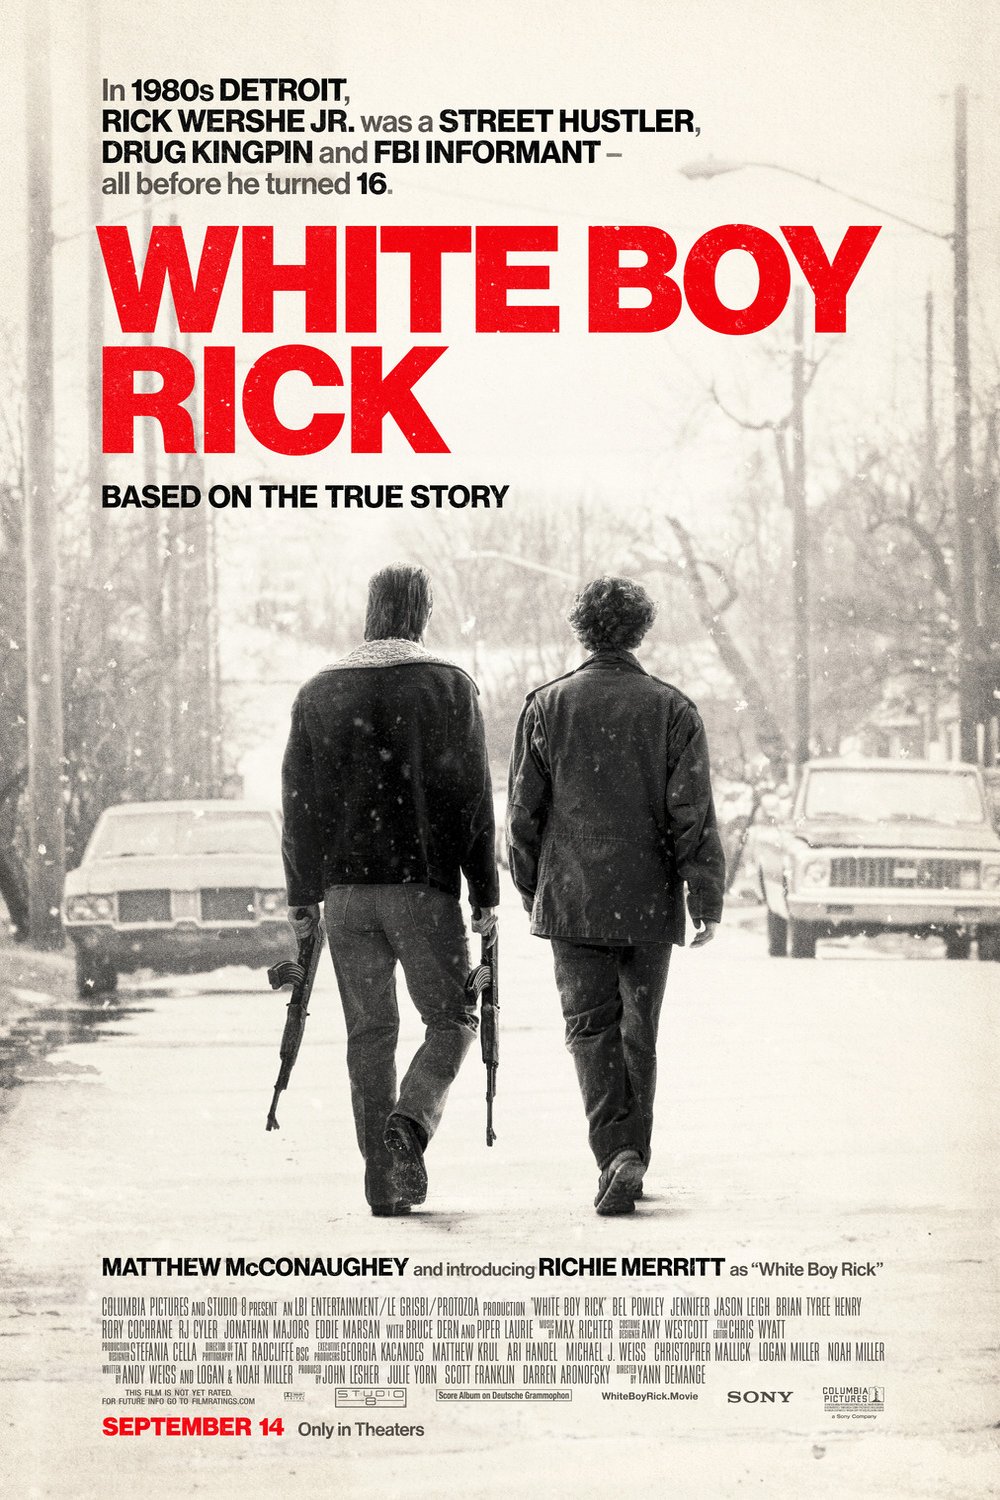 Poster of the movie White Boy Rick